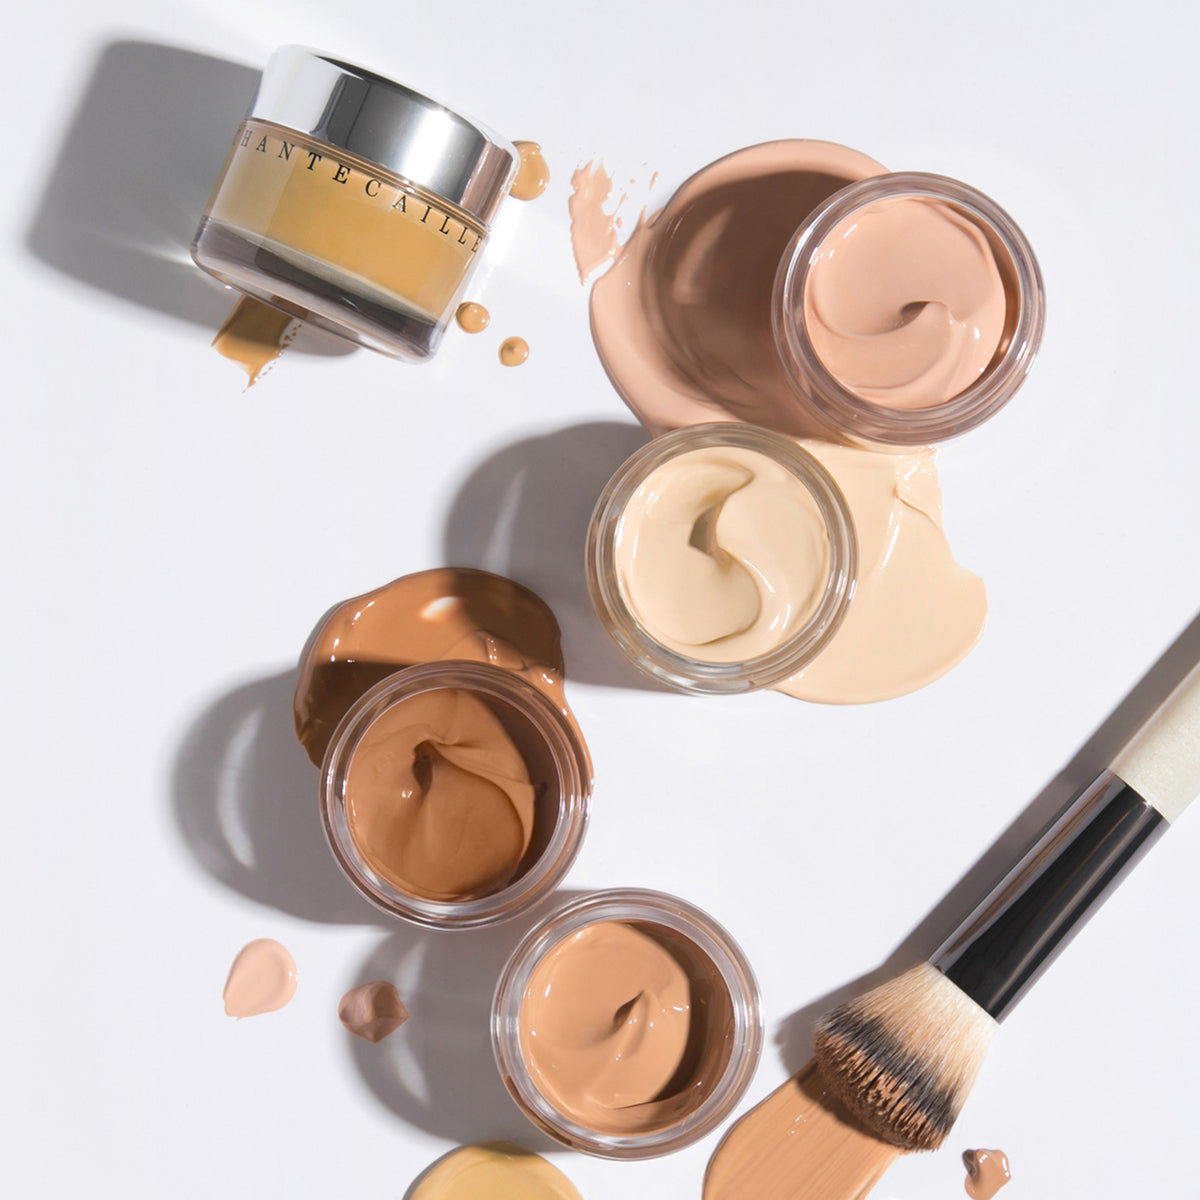 Chantecaille Future Skin Foundation . This product is for medium cool beige complexions